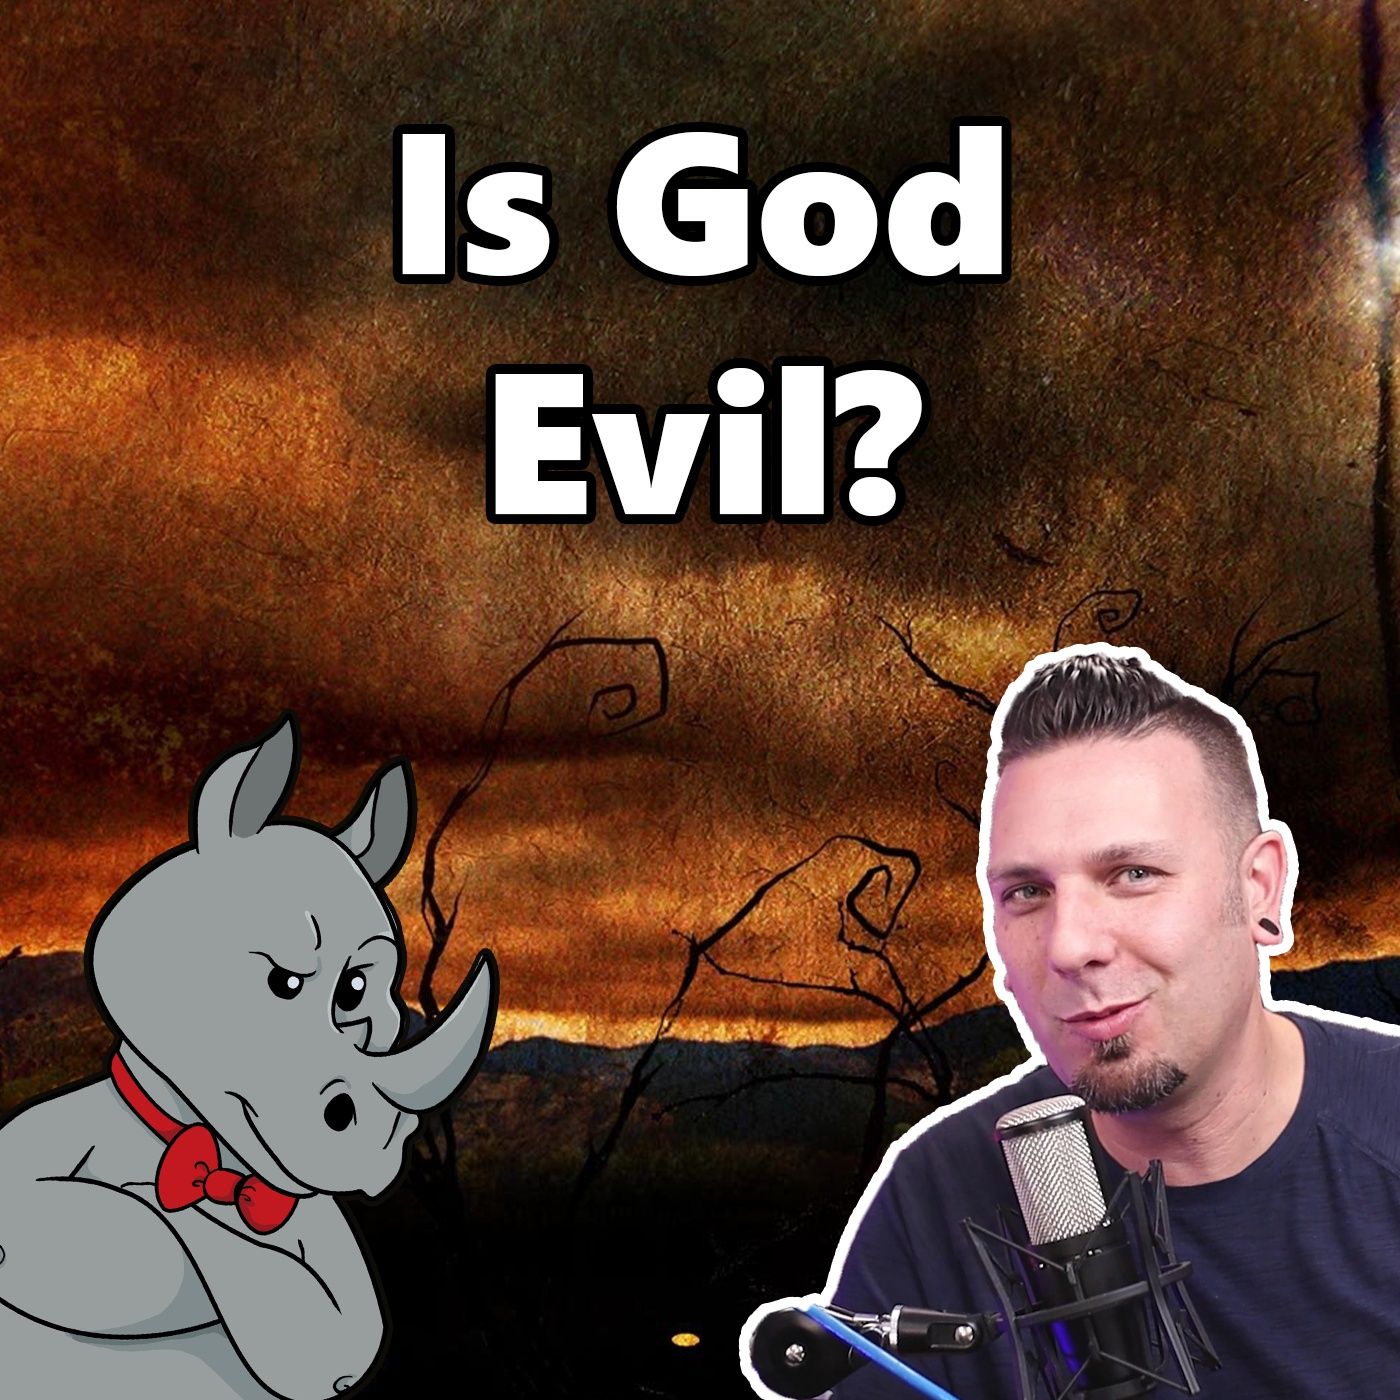 Either God is Evil, or Doesn't Exist